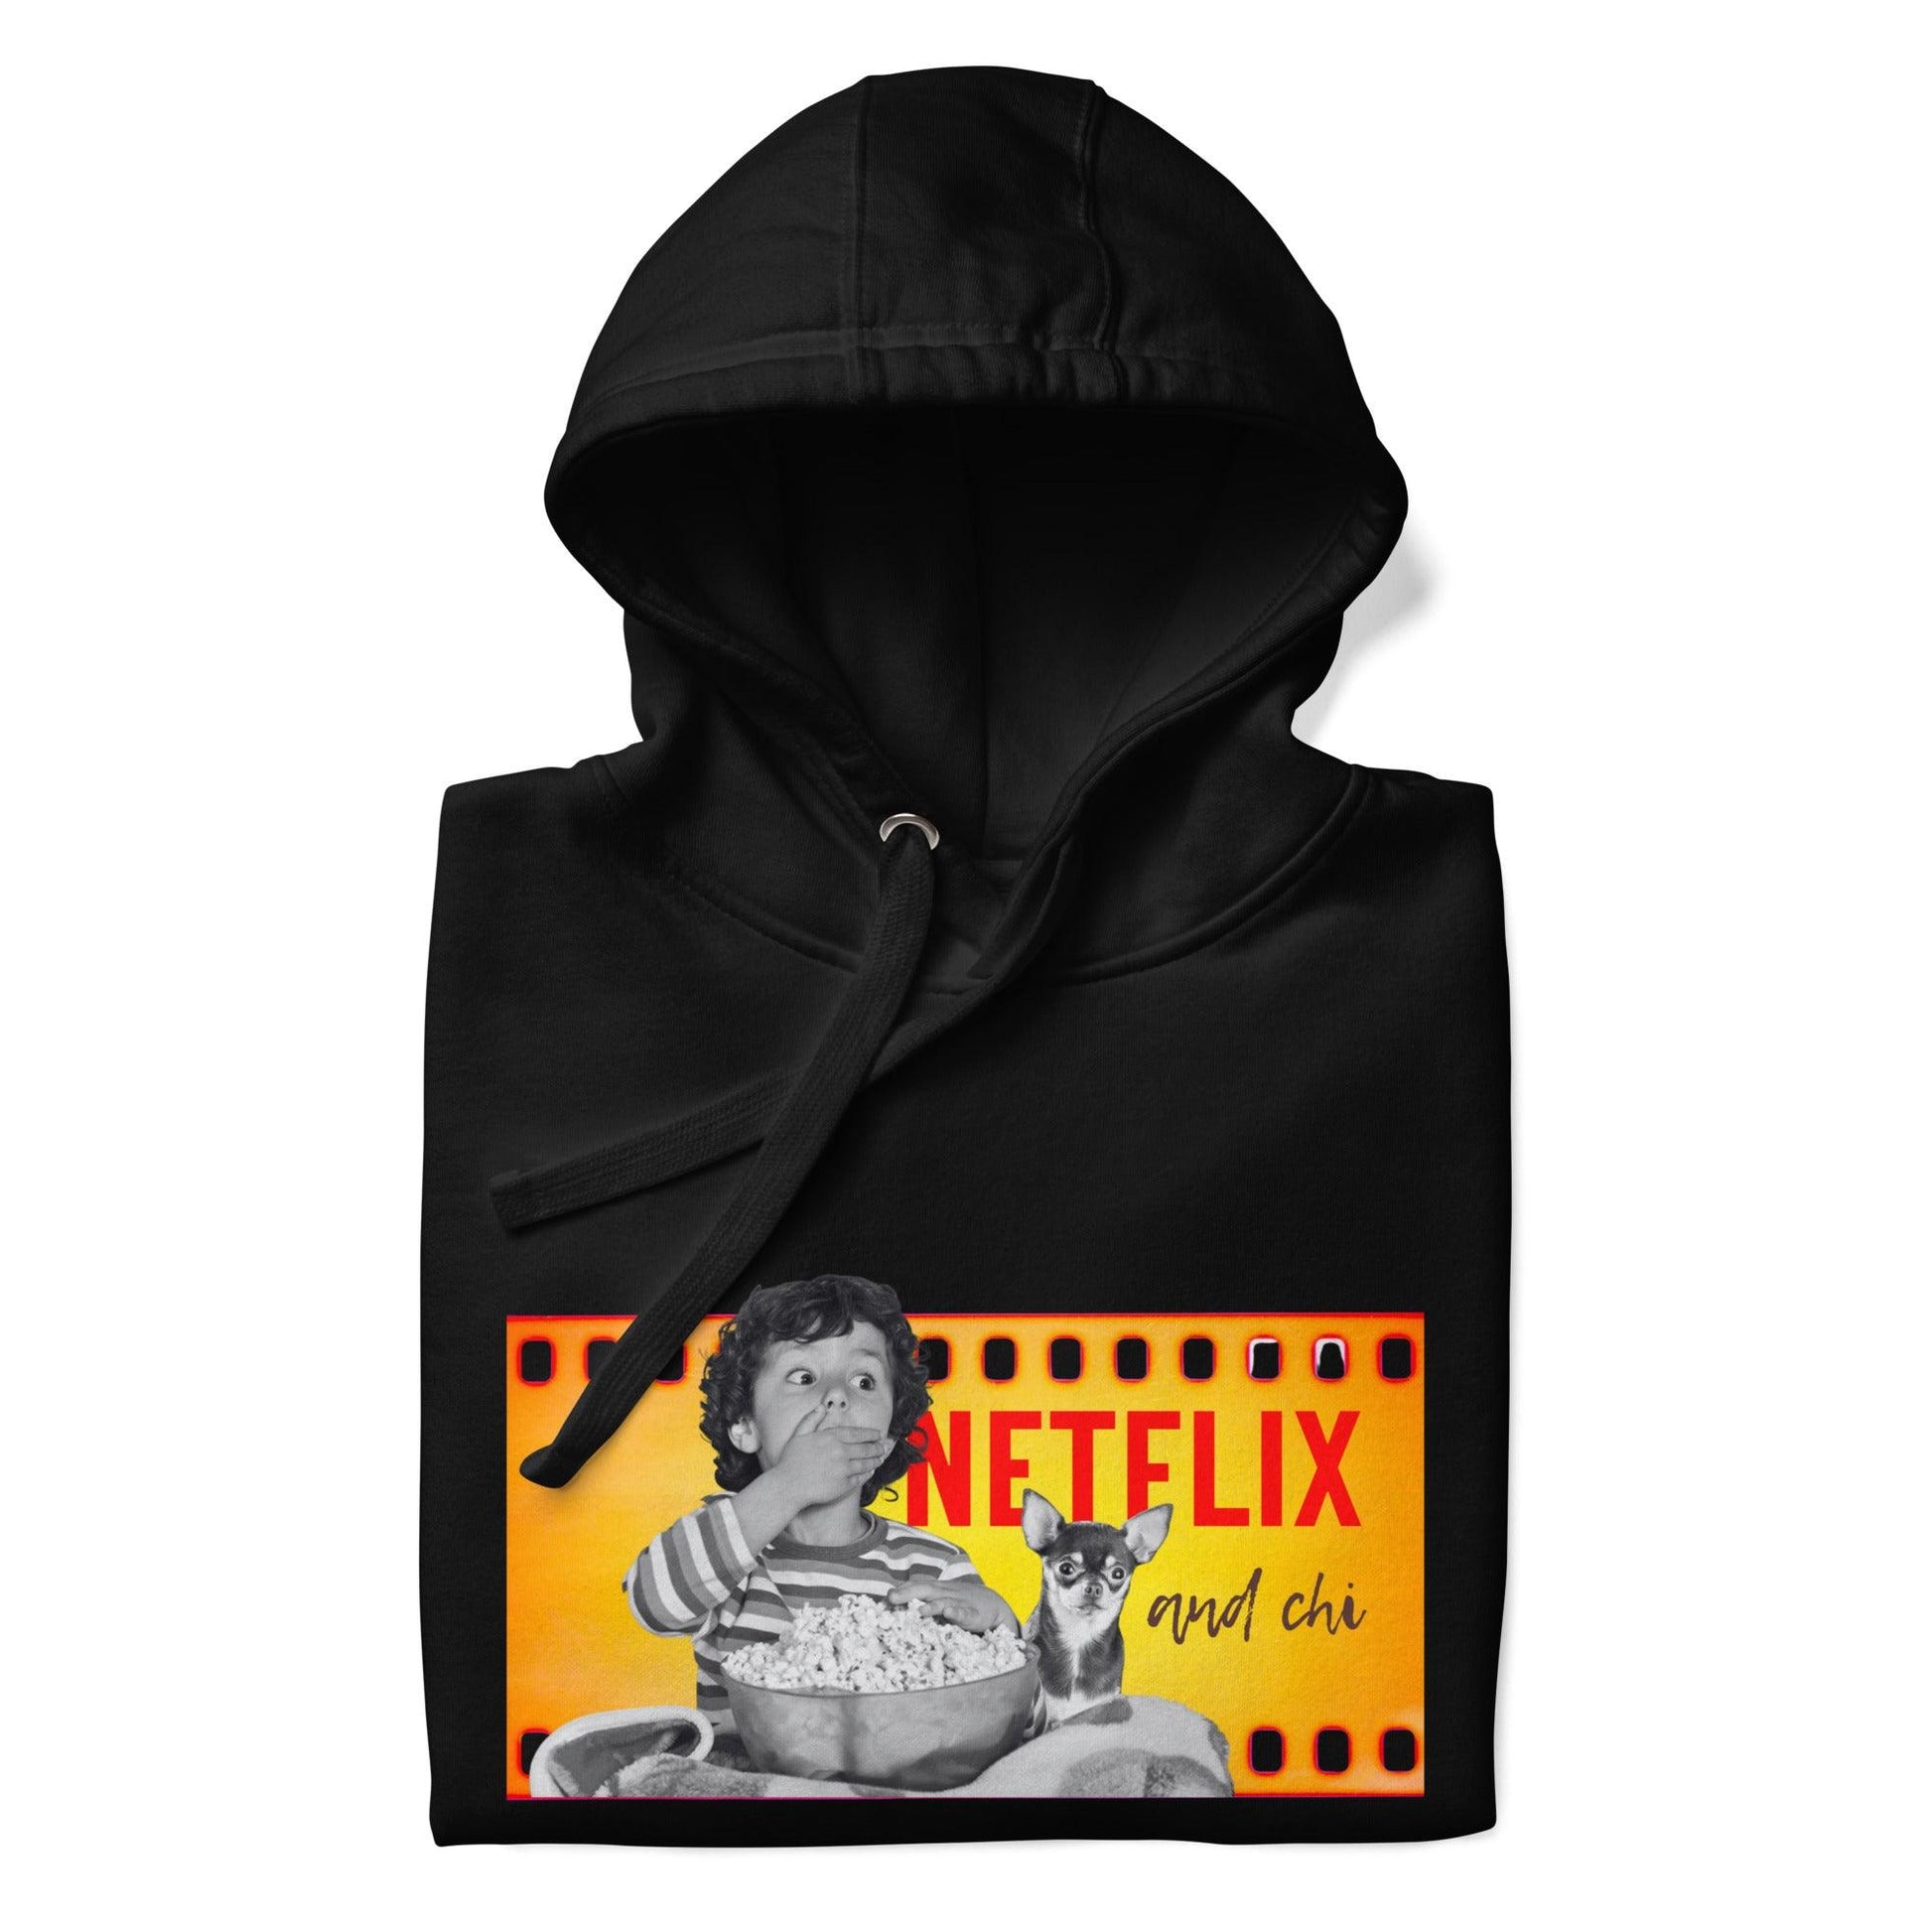 What's better than a Saturday night at home doing Netflix and Chill? Netflix and CHI! If your best Netflix and Chill sofa buddy is a little chihuahua, then this Netflix and Chi hoodie is for you. Or a brilliant gift for someone who loves chihuahuas. This cosy hoodie features a boy and his chihuahua watching a scary movie together, and the words "Netflix and Chi". White, grey or black. Unisex sizes S to 3XL for men, women and teens. Design by Renate Kriegler for Chimigos.